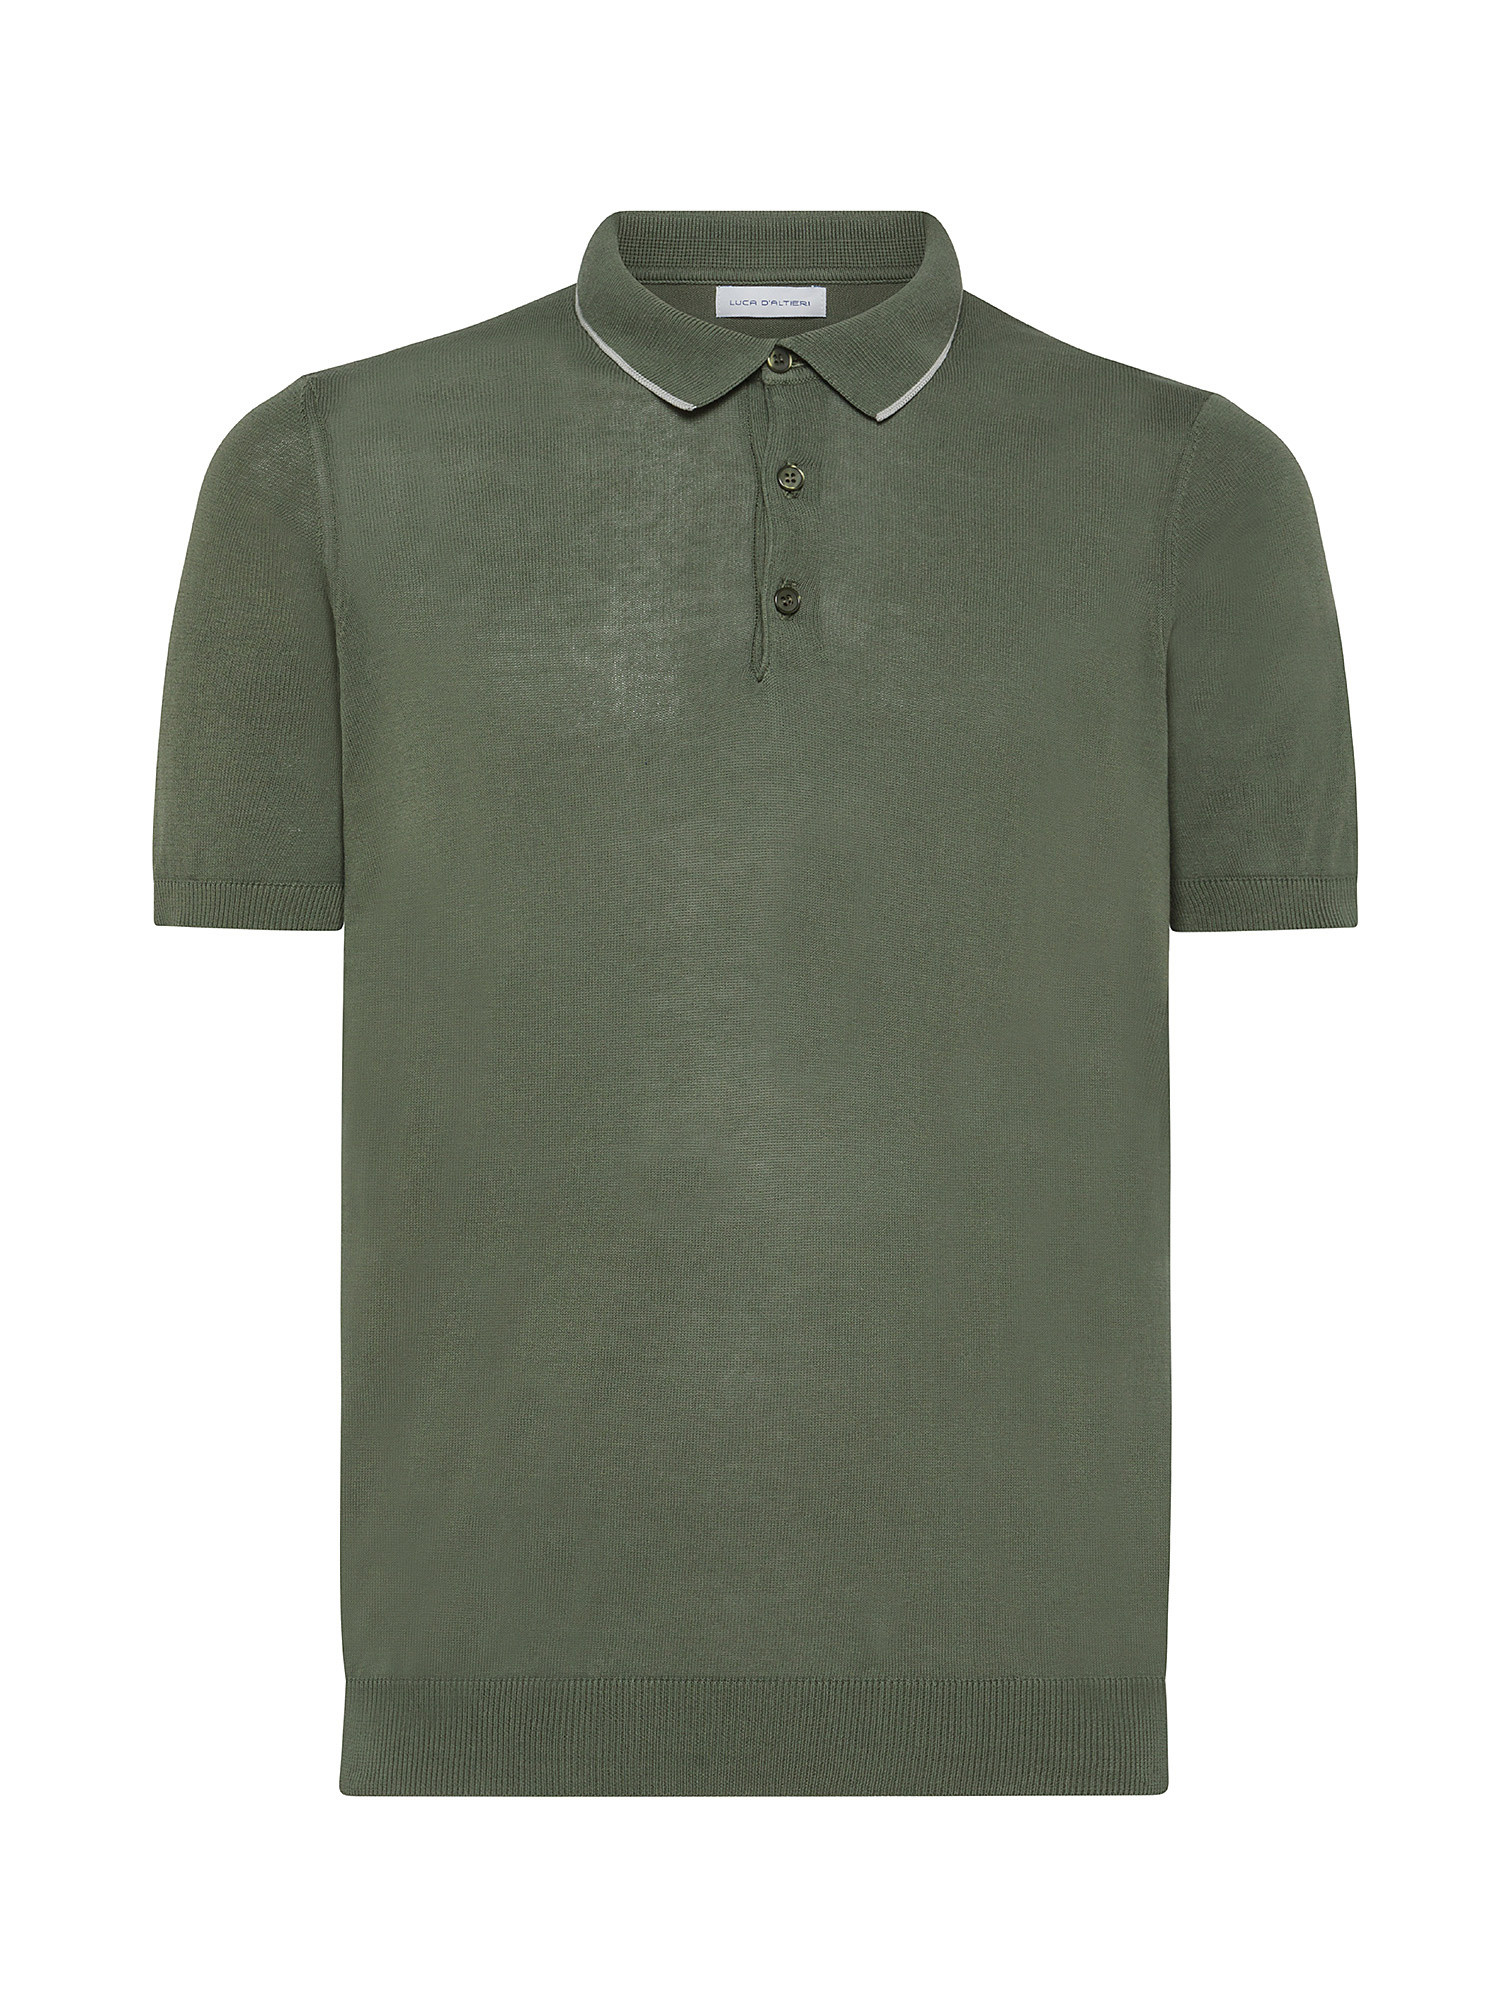 Luca D'Altieri - Cotton crepe polo shirt, Green, large image number 0